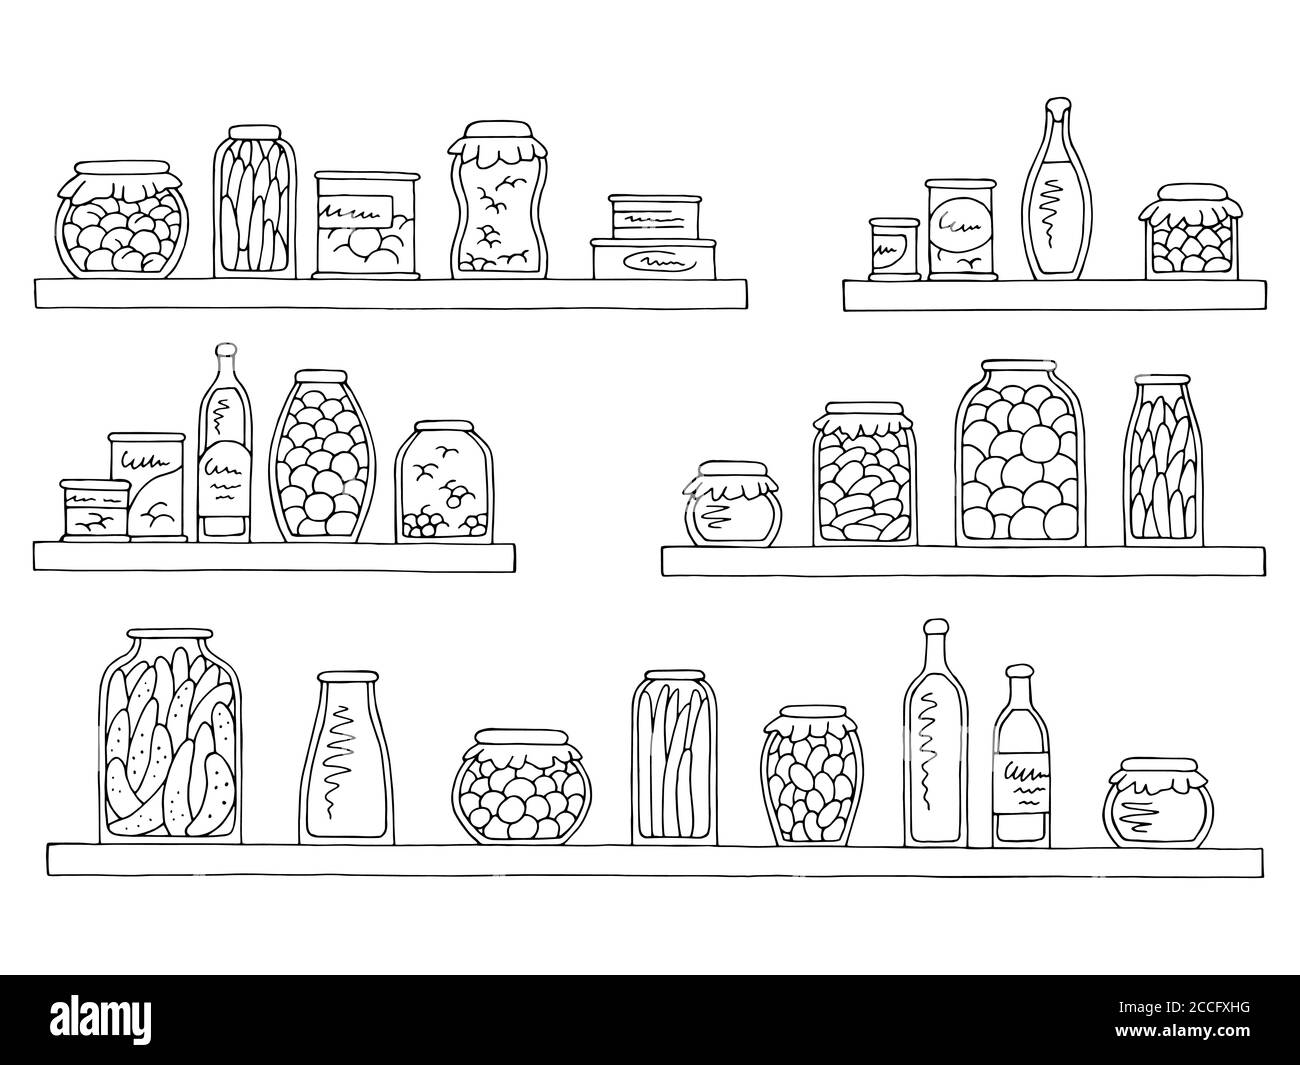 Shelves set graphic black white isolated sketch can food grocery store illustration vector Stock Vector